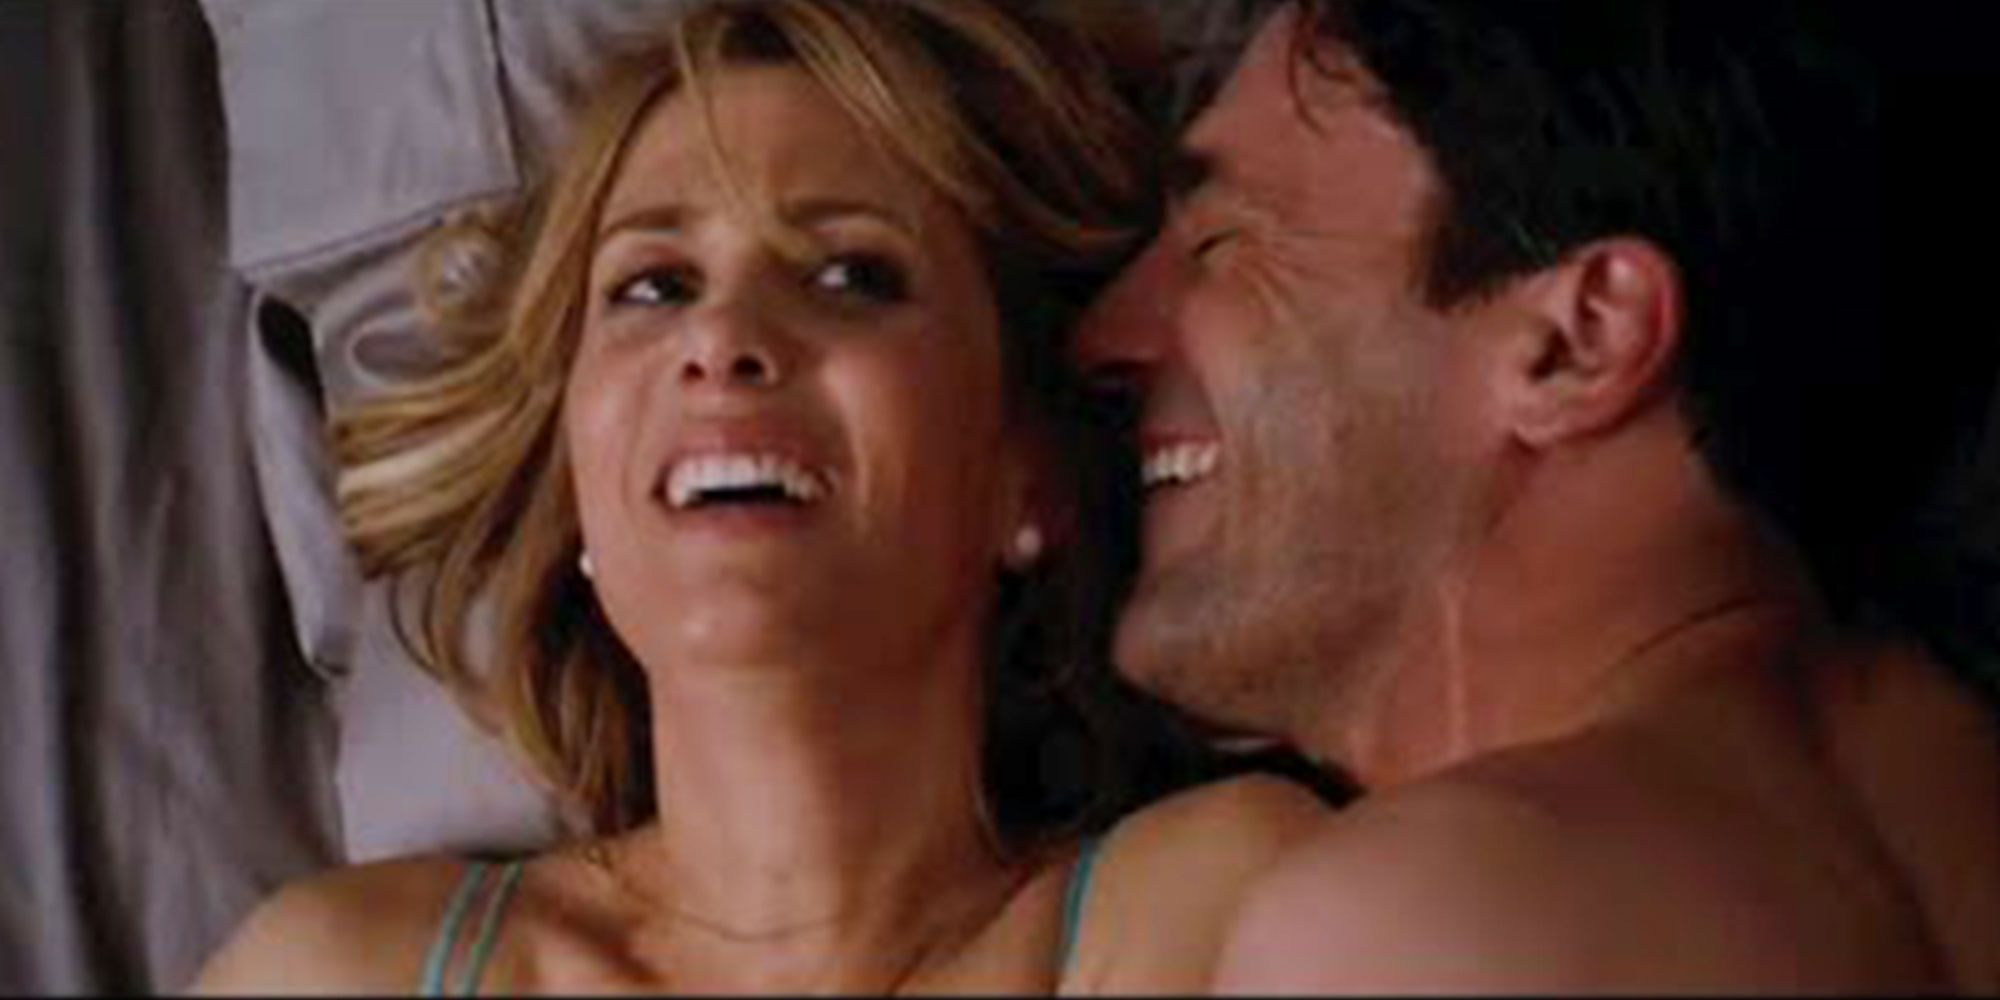 10 Sex Scenes That Were Funnier Than Expected